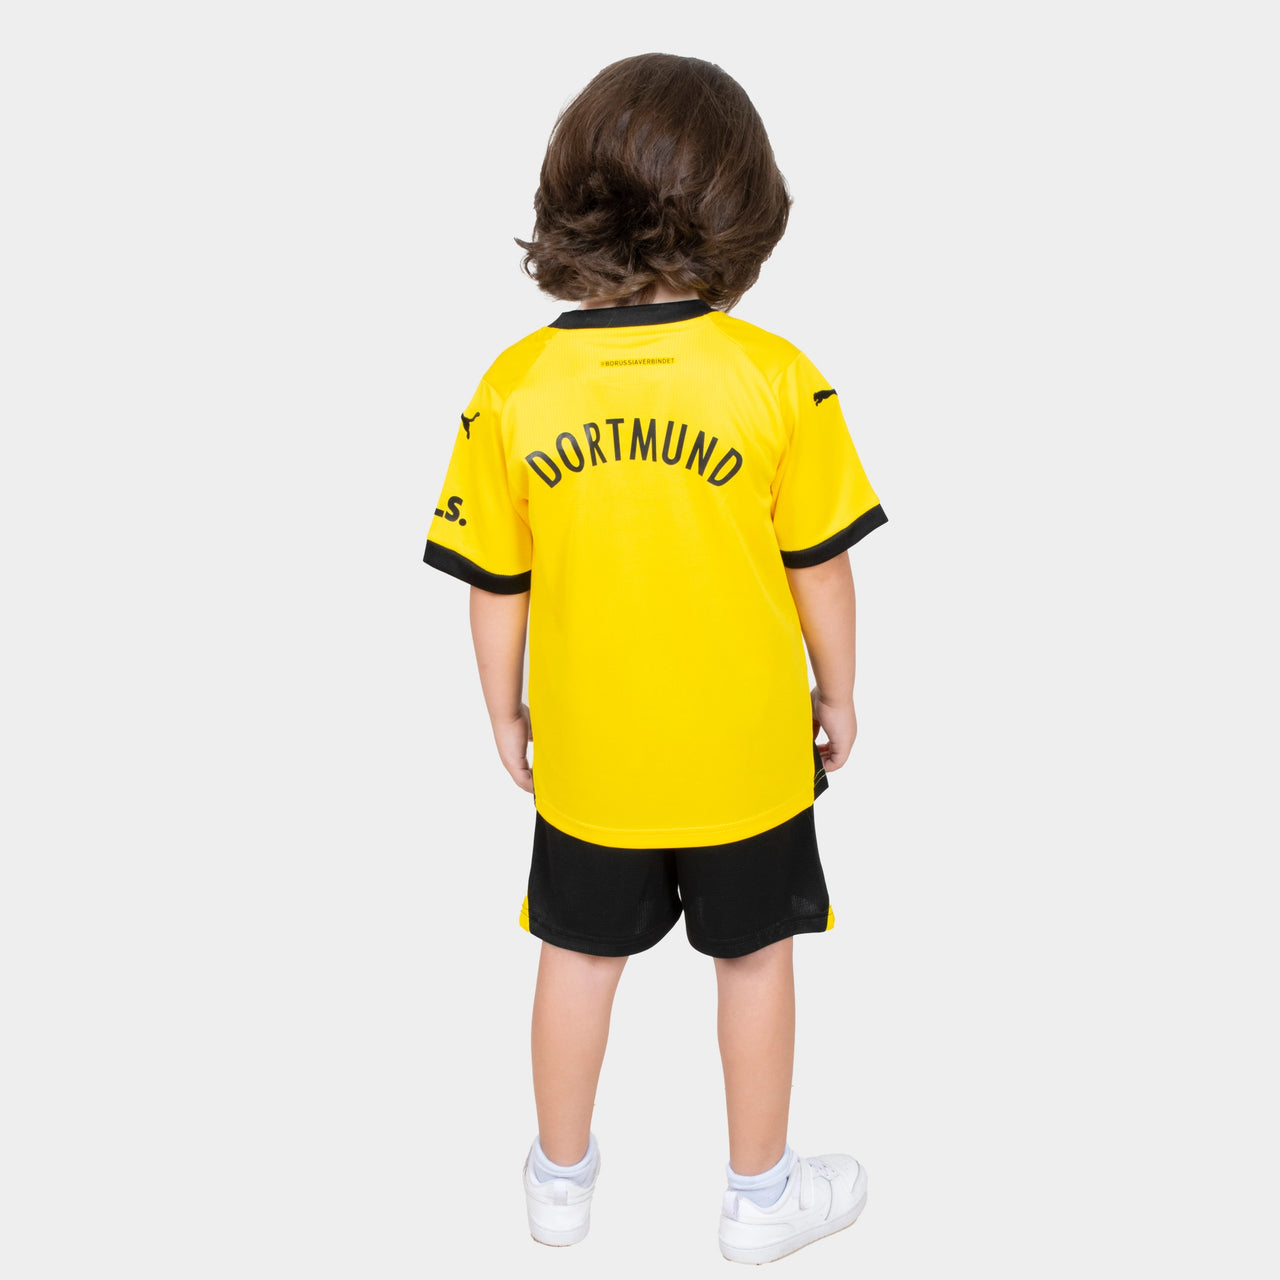 Borussia Dortmund Kids Kit Home Season 23/24 Designed By Mitani Store , Regular Fit Jersey Short Sleeves And Round Neck Collar In Yellow Color